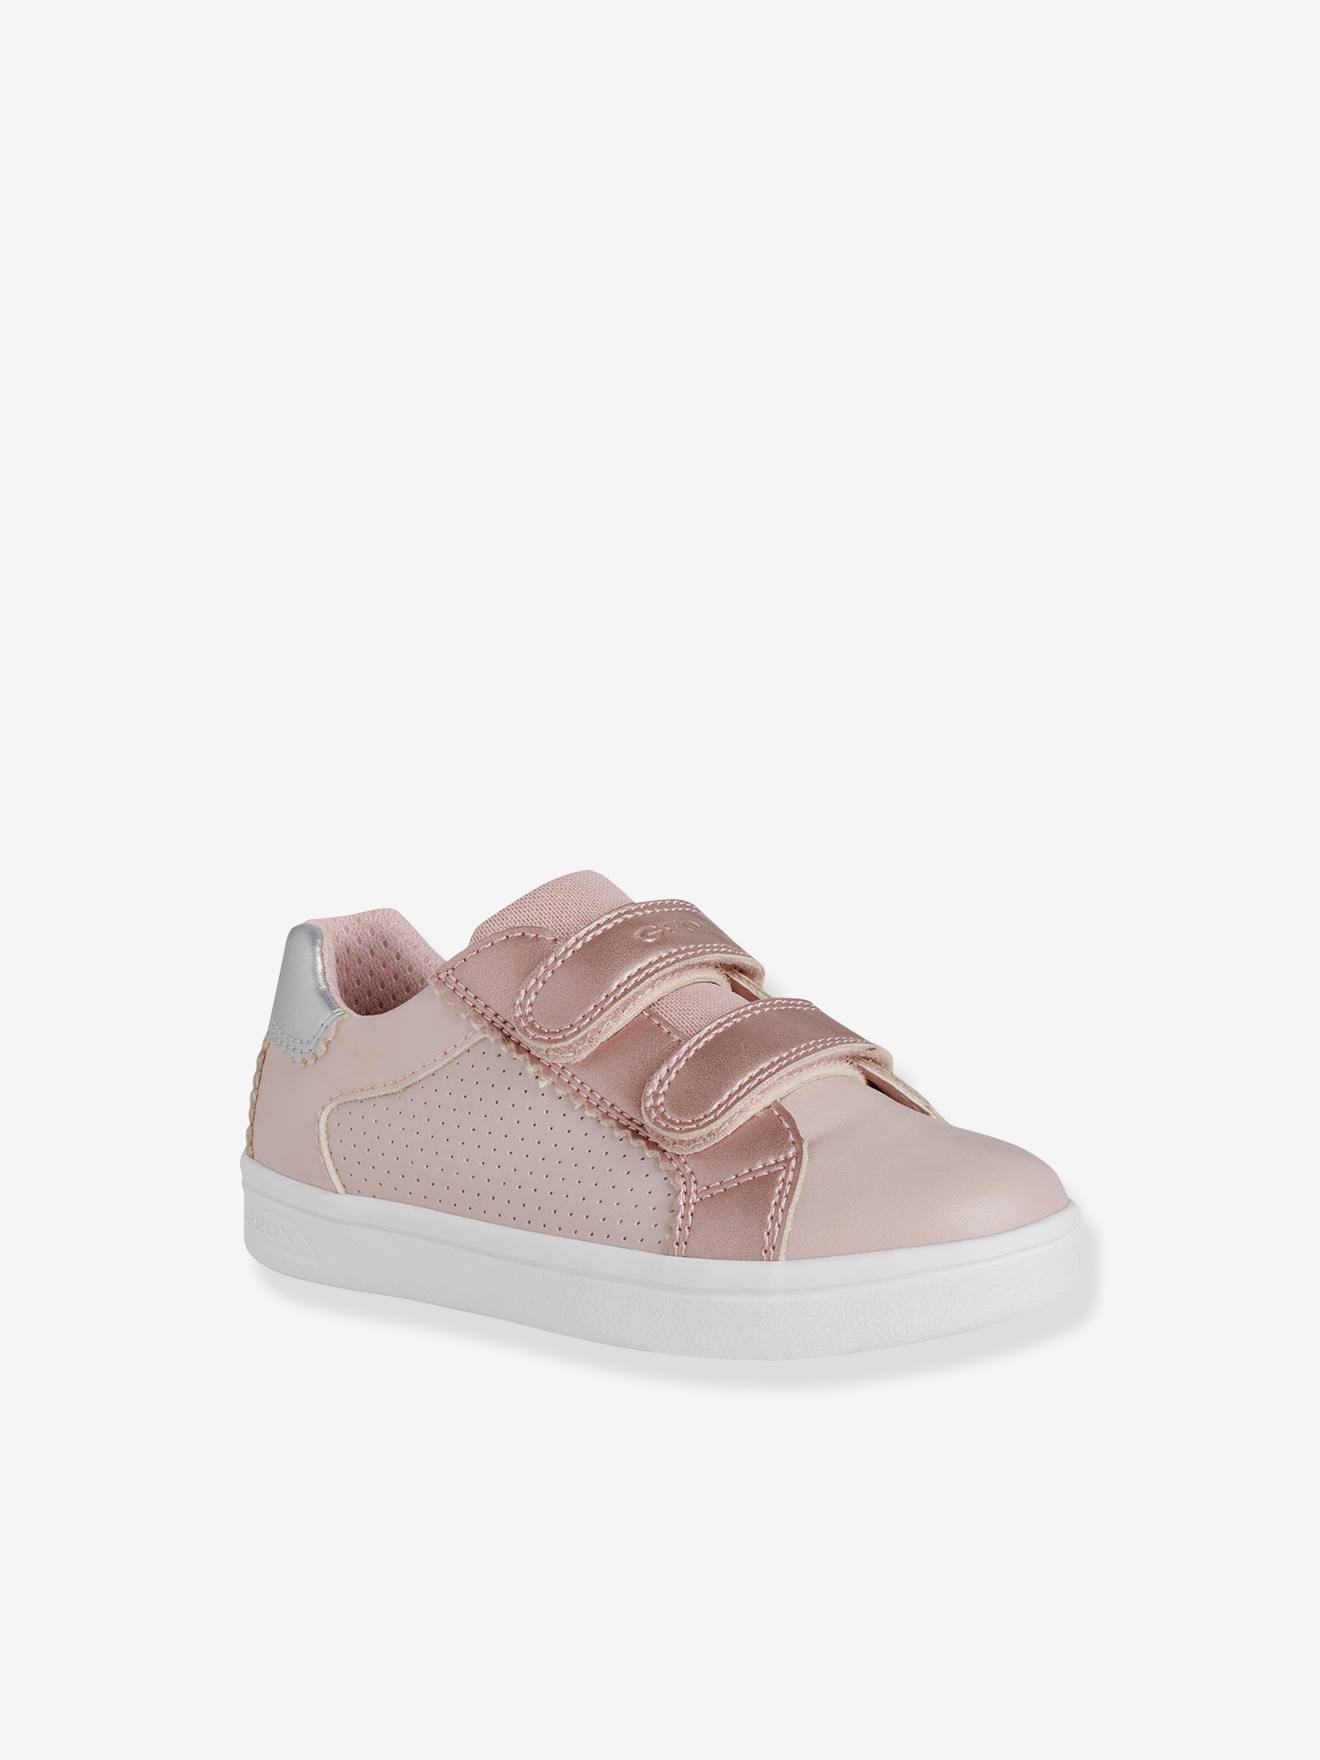 Djrock Girl D Trainers by GEOX(r), for Children rose